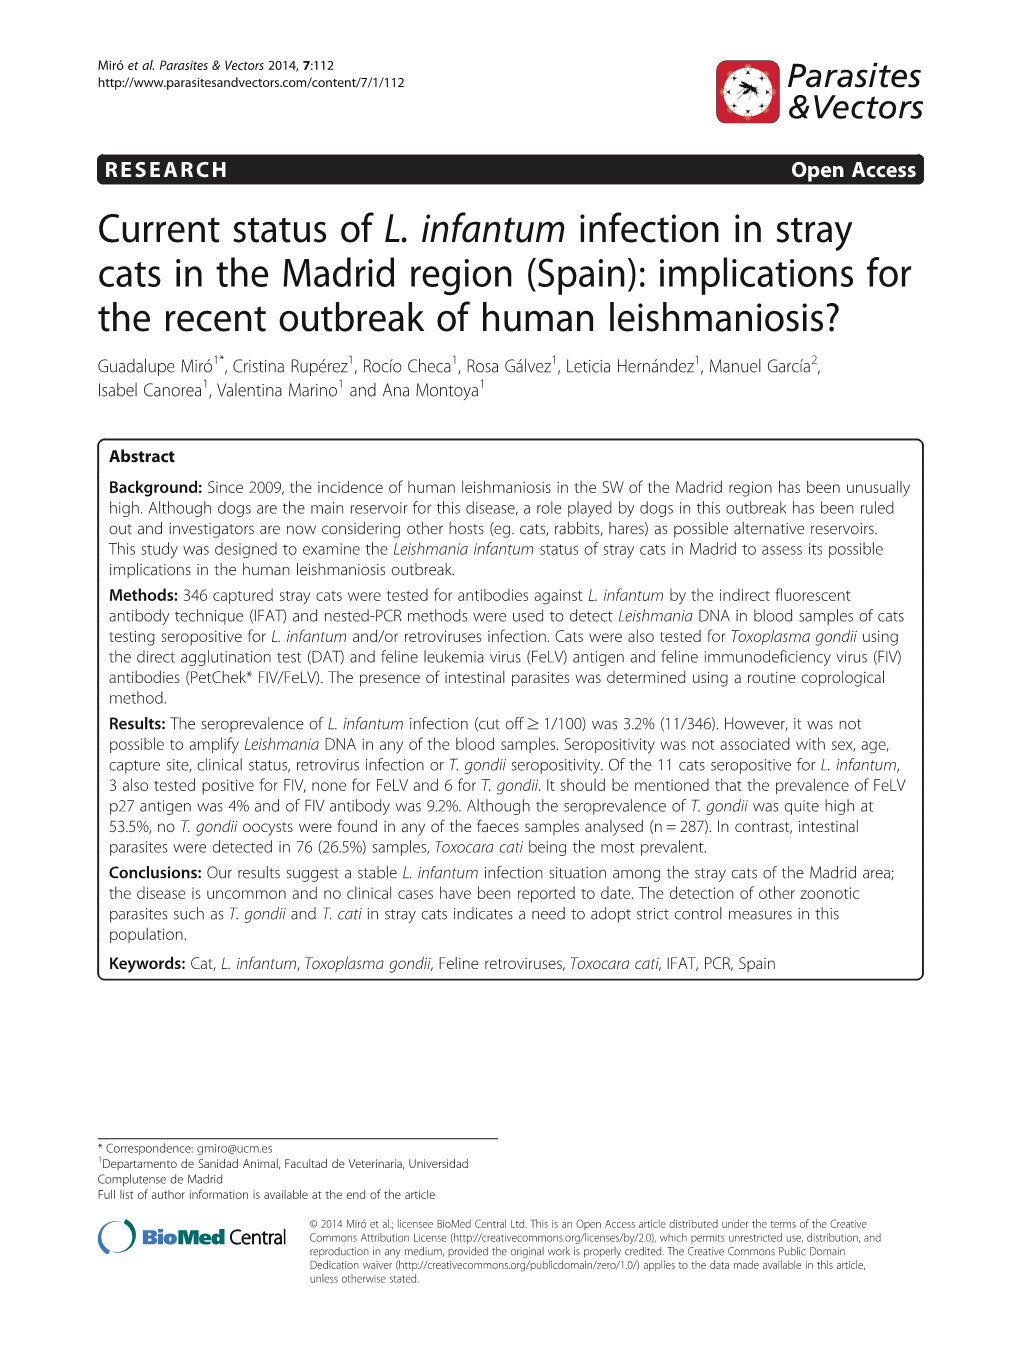 Current Status of L. Infantum Infection in Stray Cats in the Madrid Region